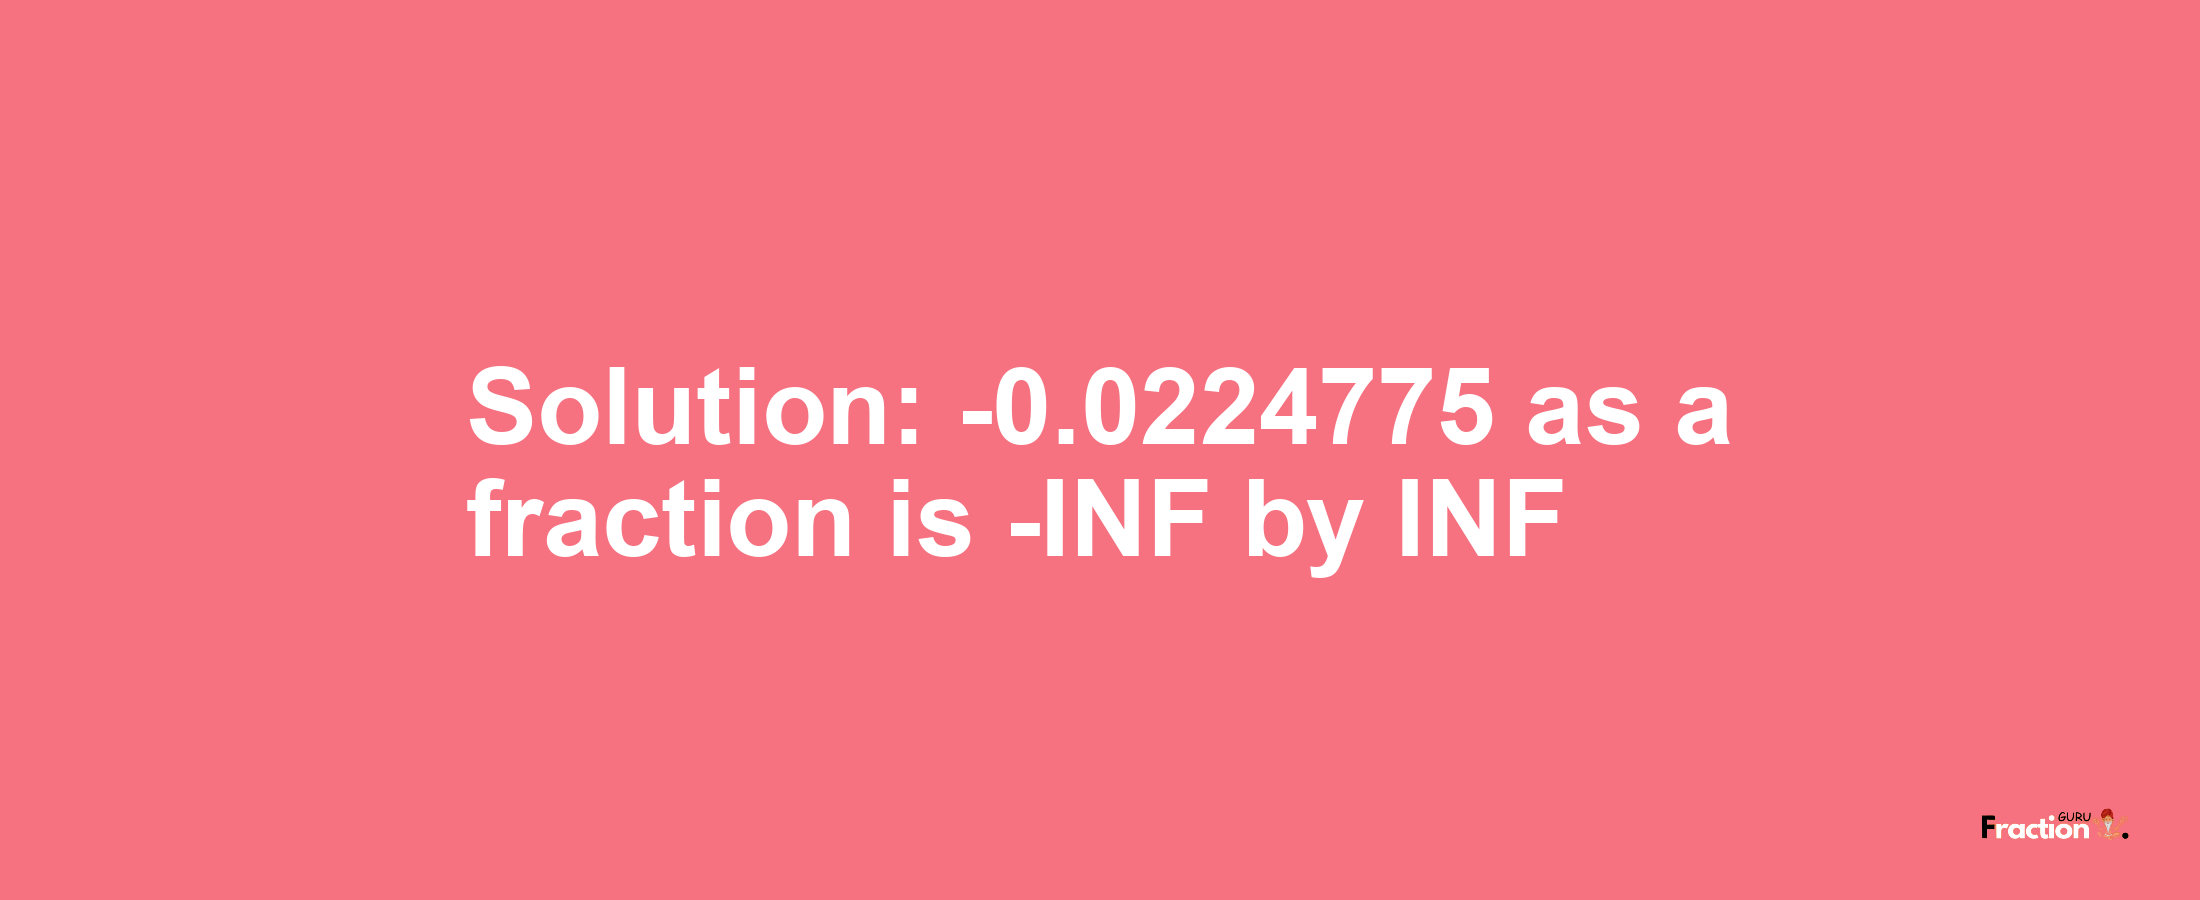 Solution:-0.0224775 as a fraction is -INF/INF